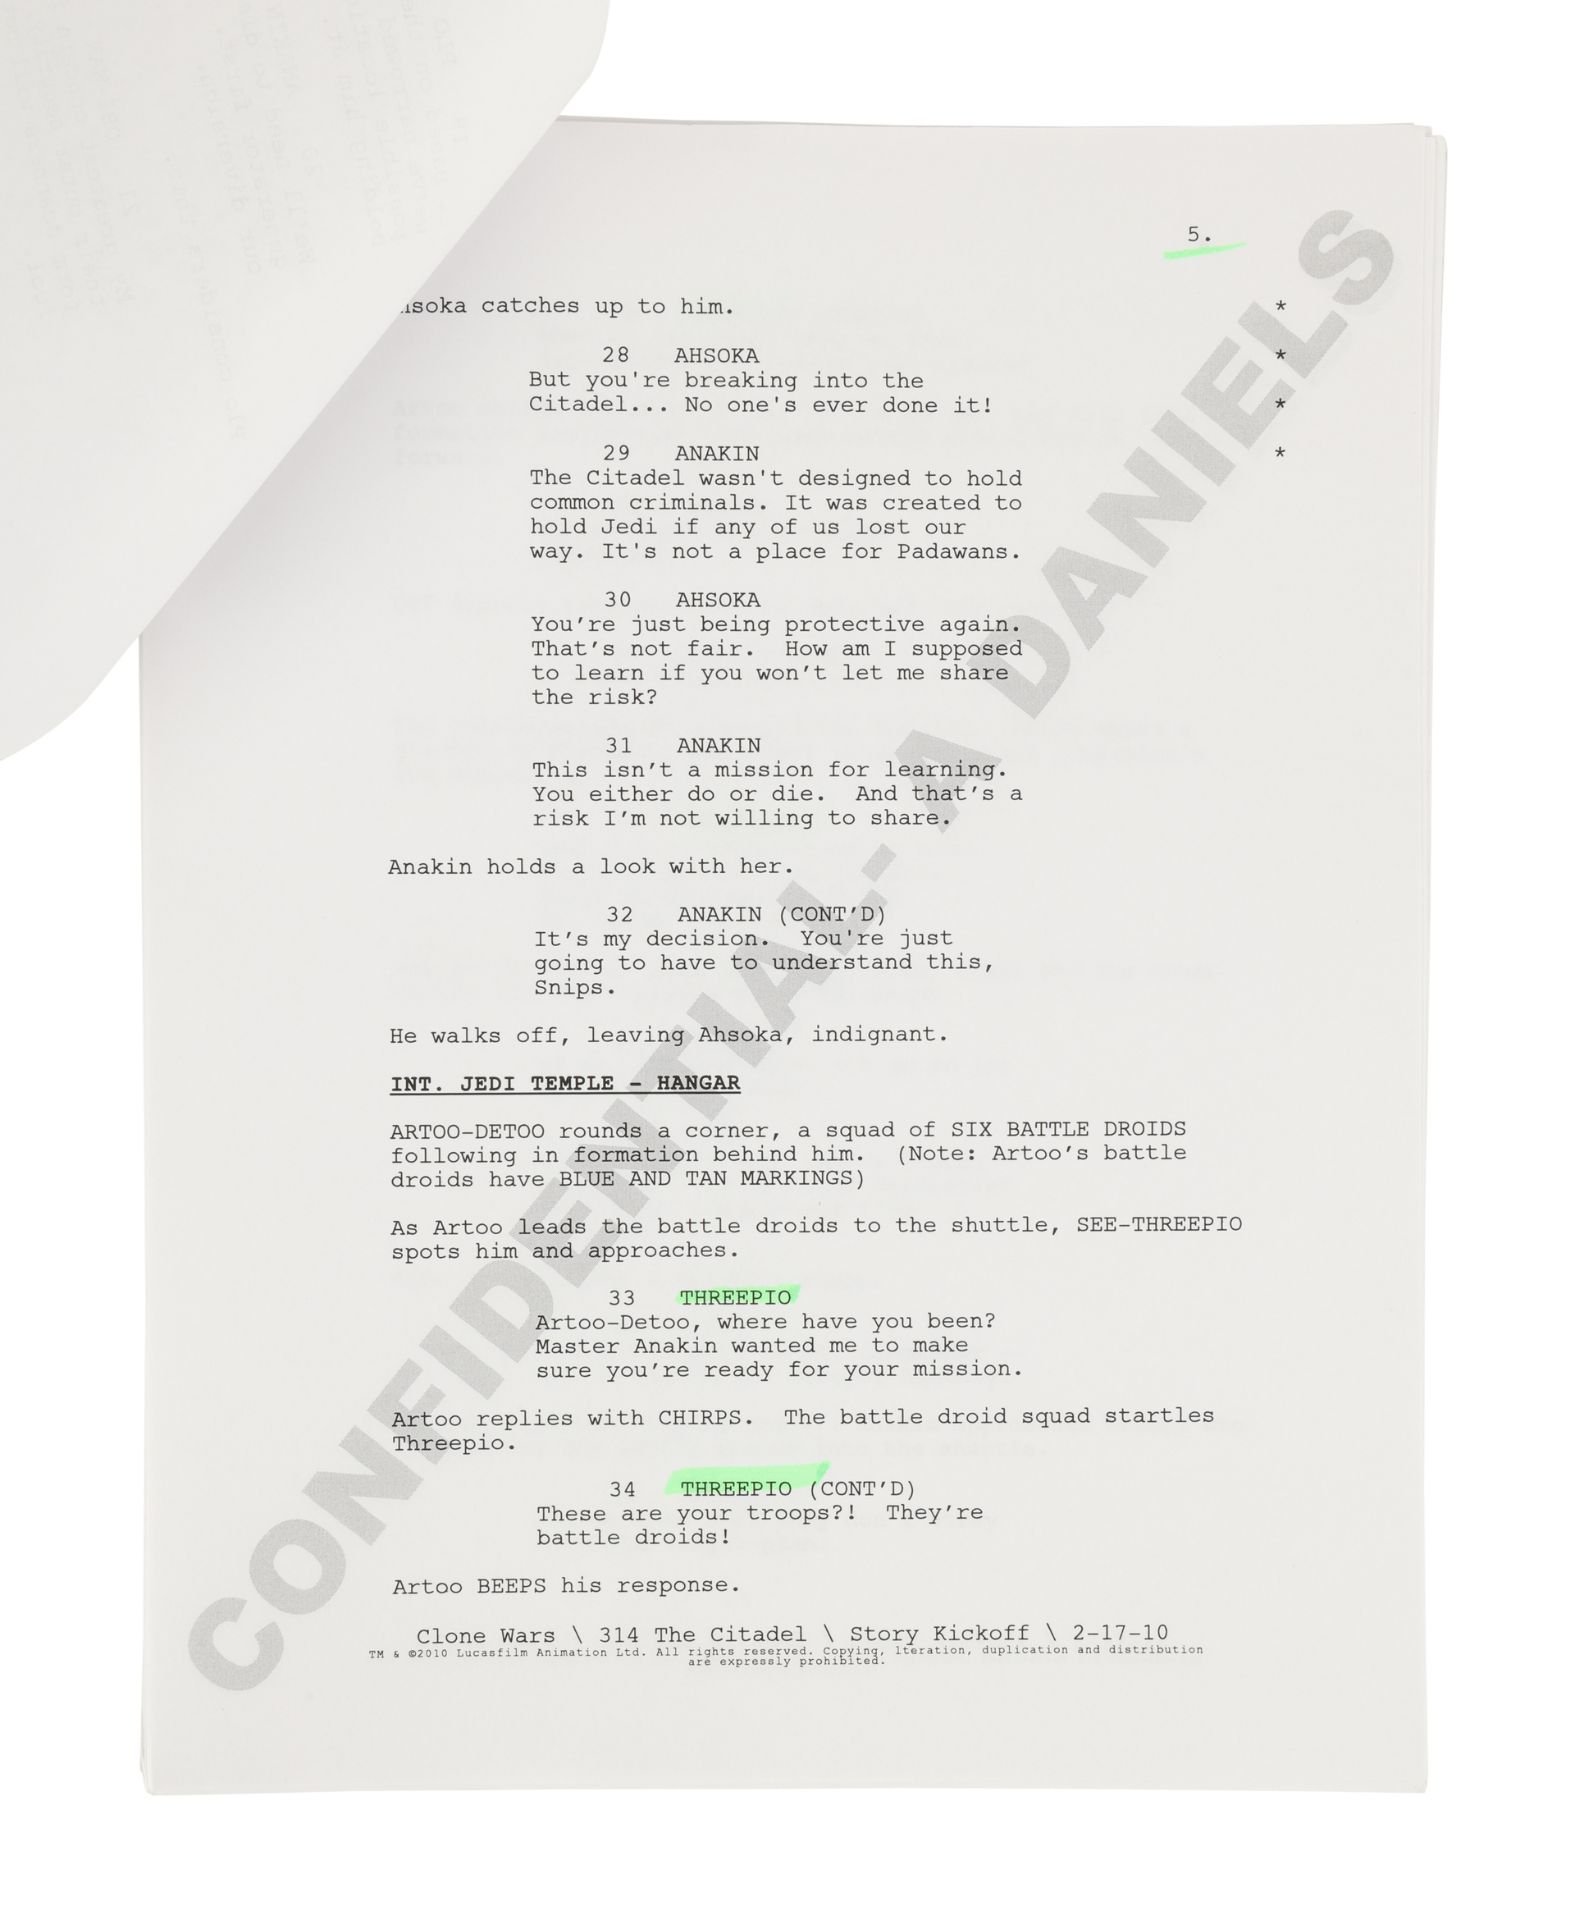 STAR WARS: THE CLONE WARS (2008-2020) - Anthony Daniels Collection: Pair of Anthony Daniels' Scripts - Image 11 of 12